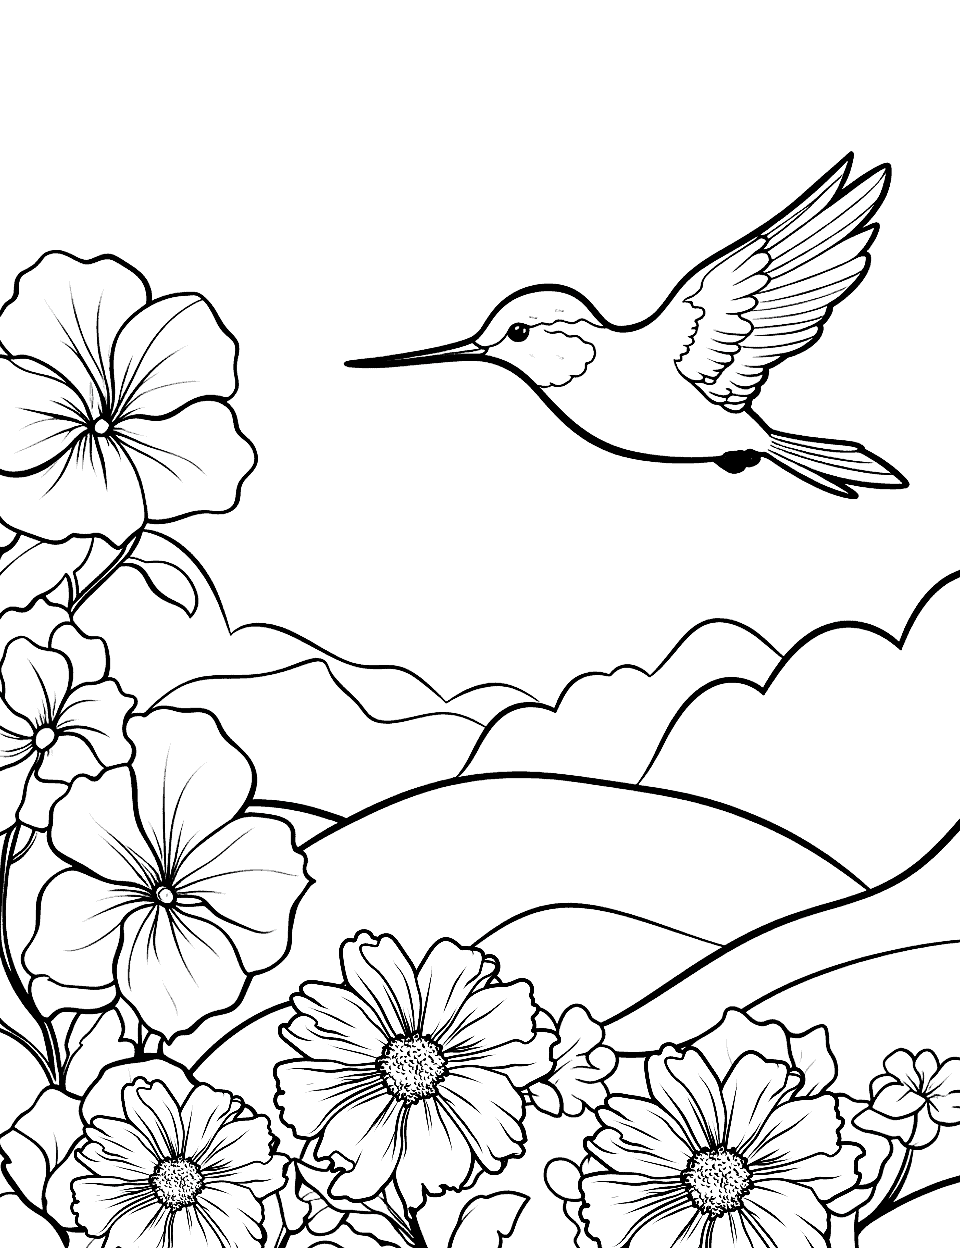 Hummingbird Near a Blossom Coloring Page - A hummingbird hovering close to blooming flowers.